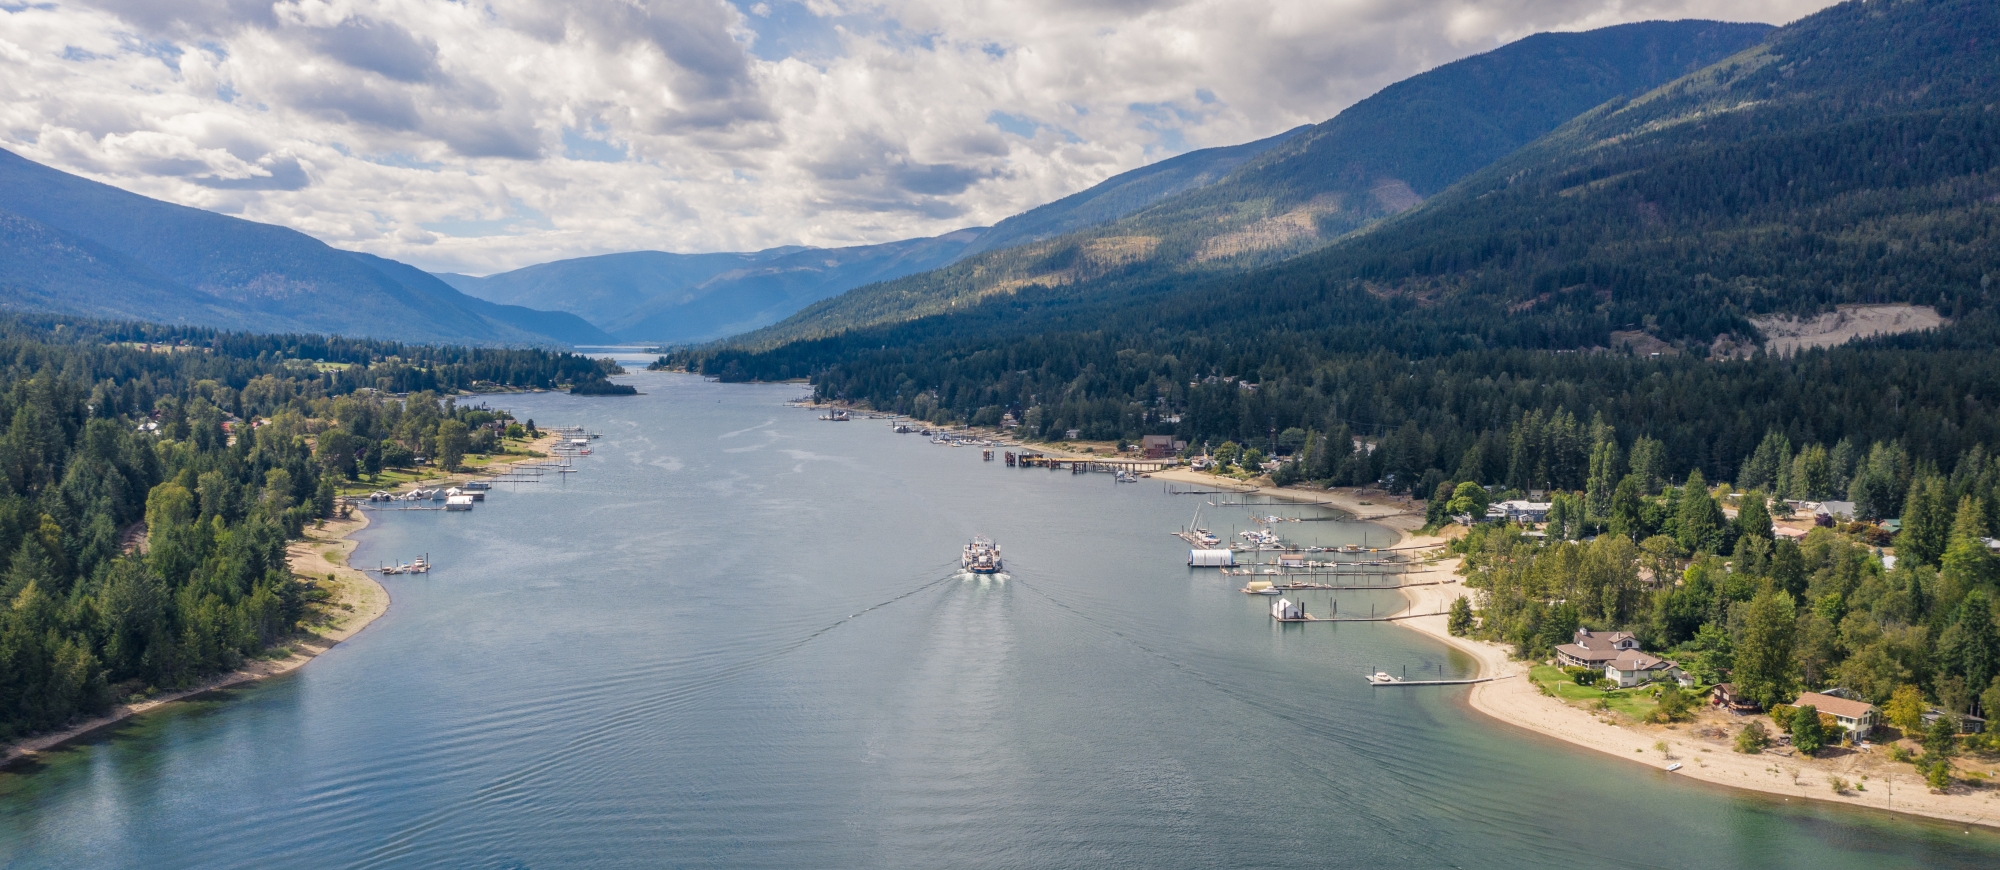 A ferry on a journey across Kootenay Lake to Balfour. Photo by Mitch Winton.